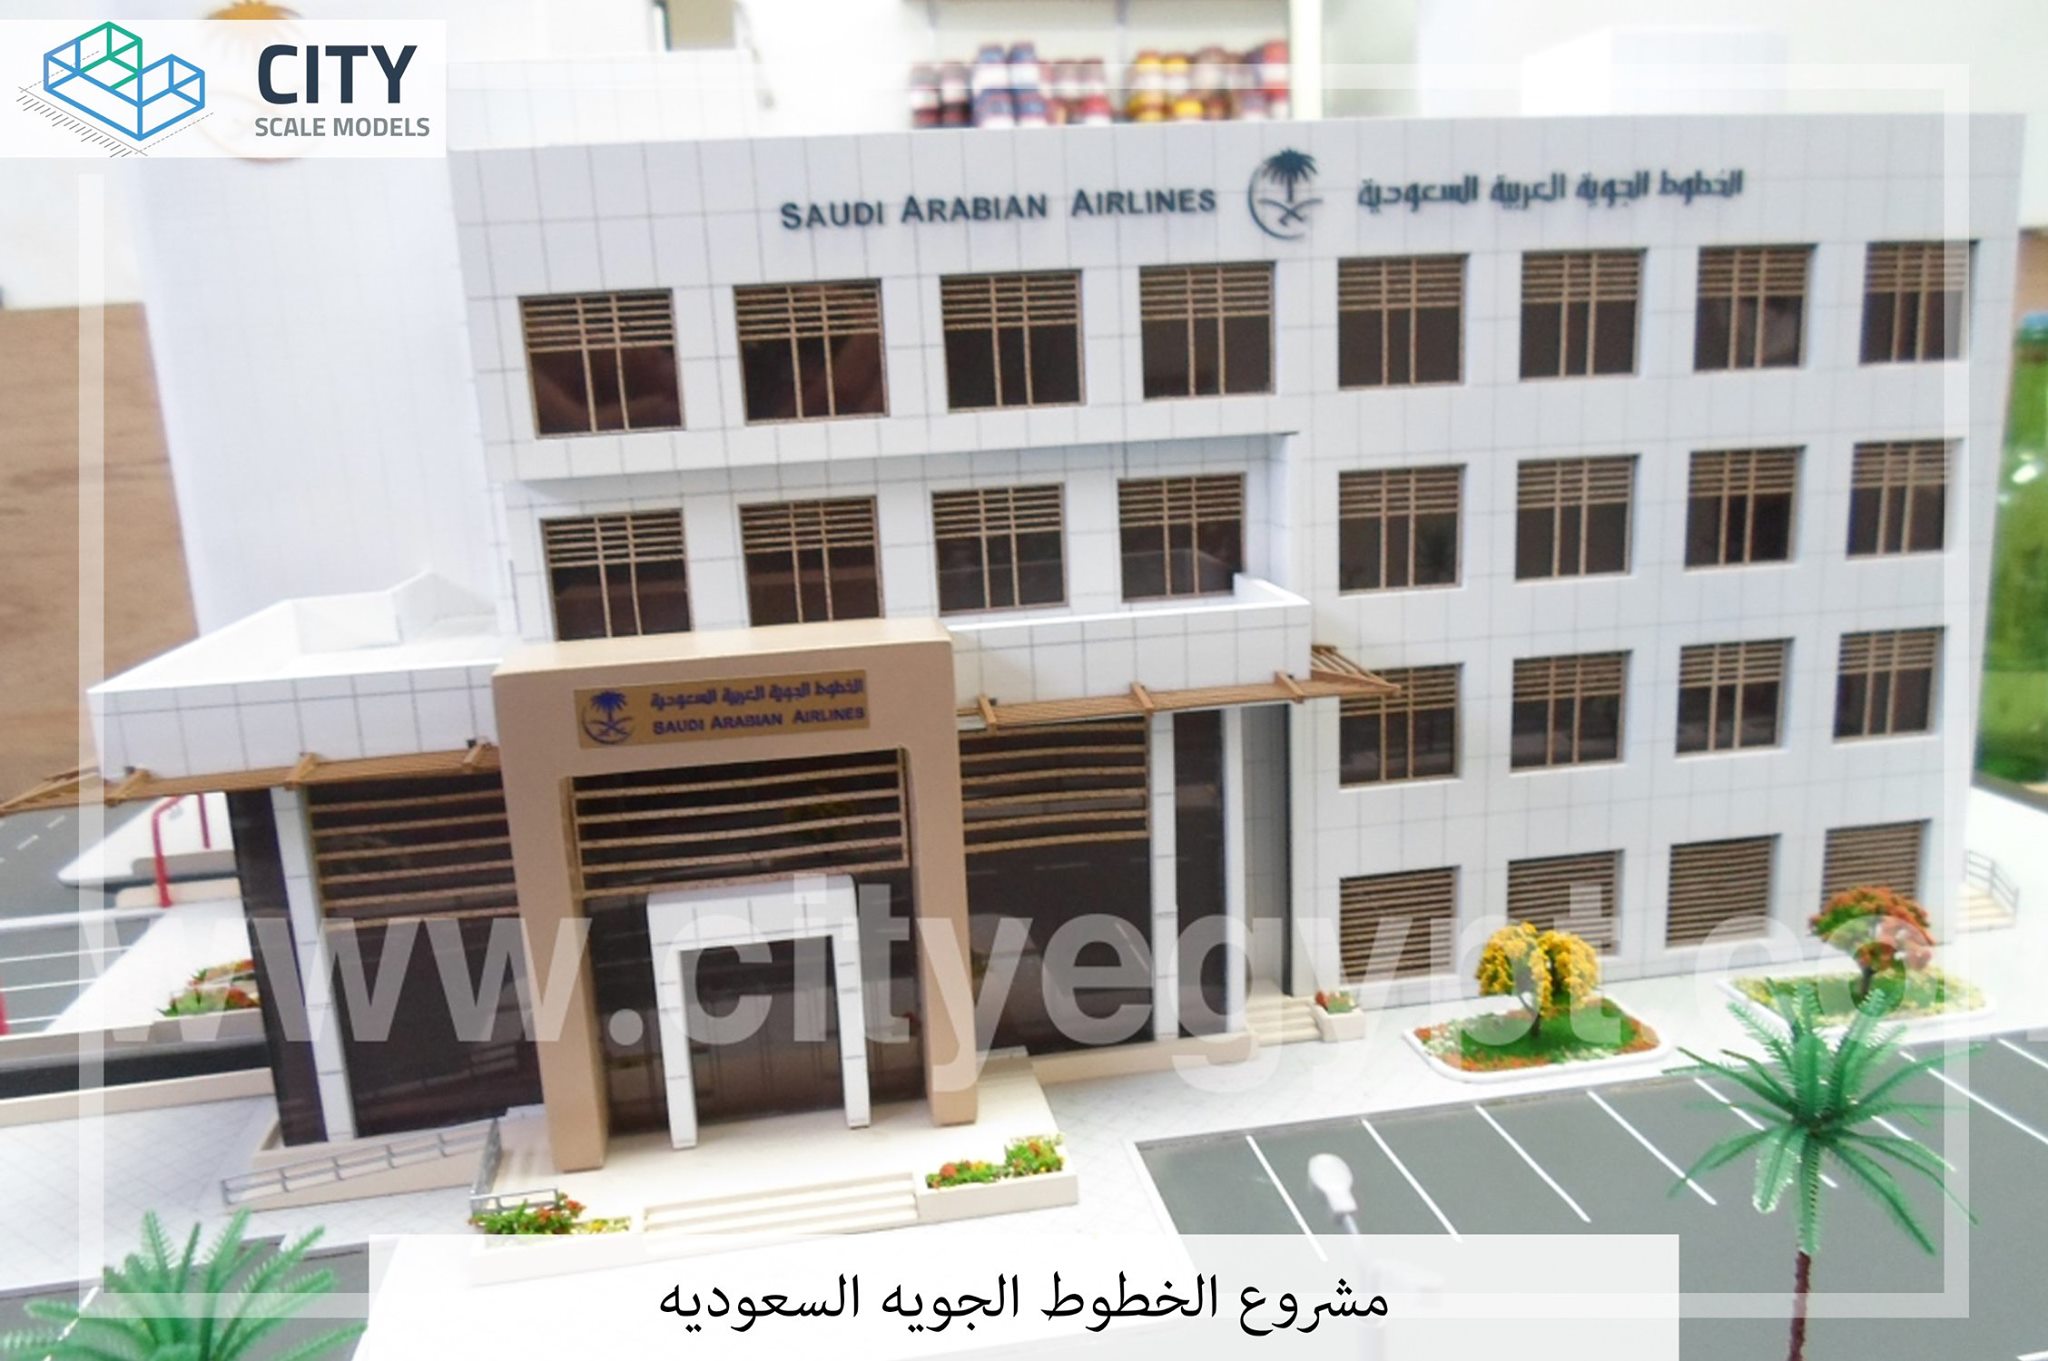 A model of the Saudi Airlines building2